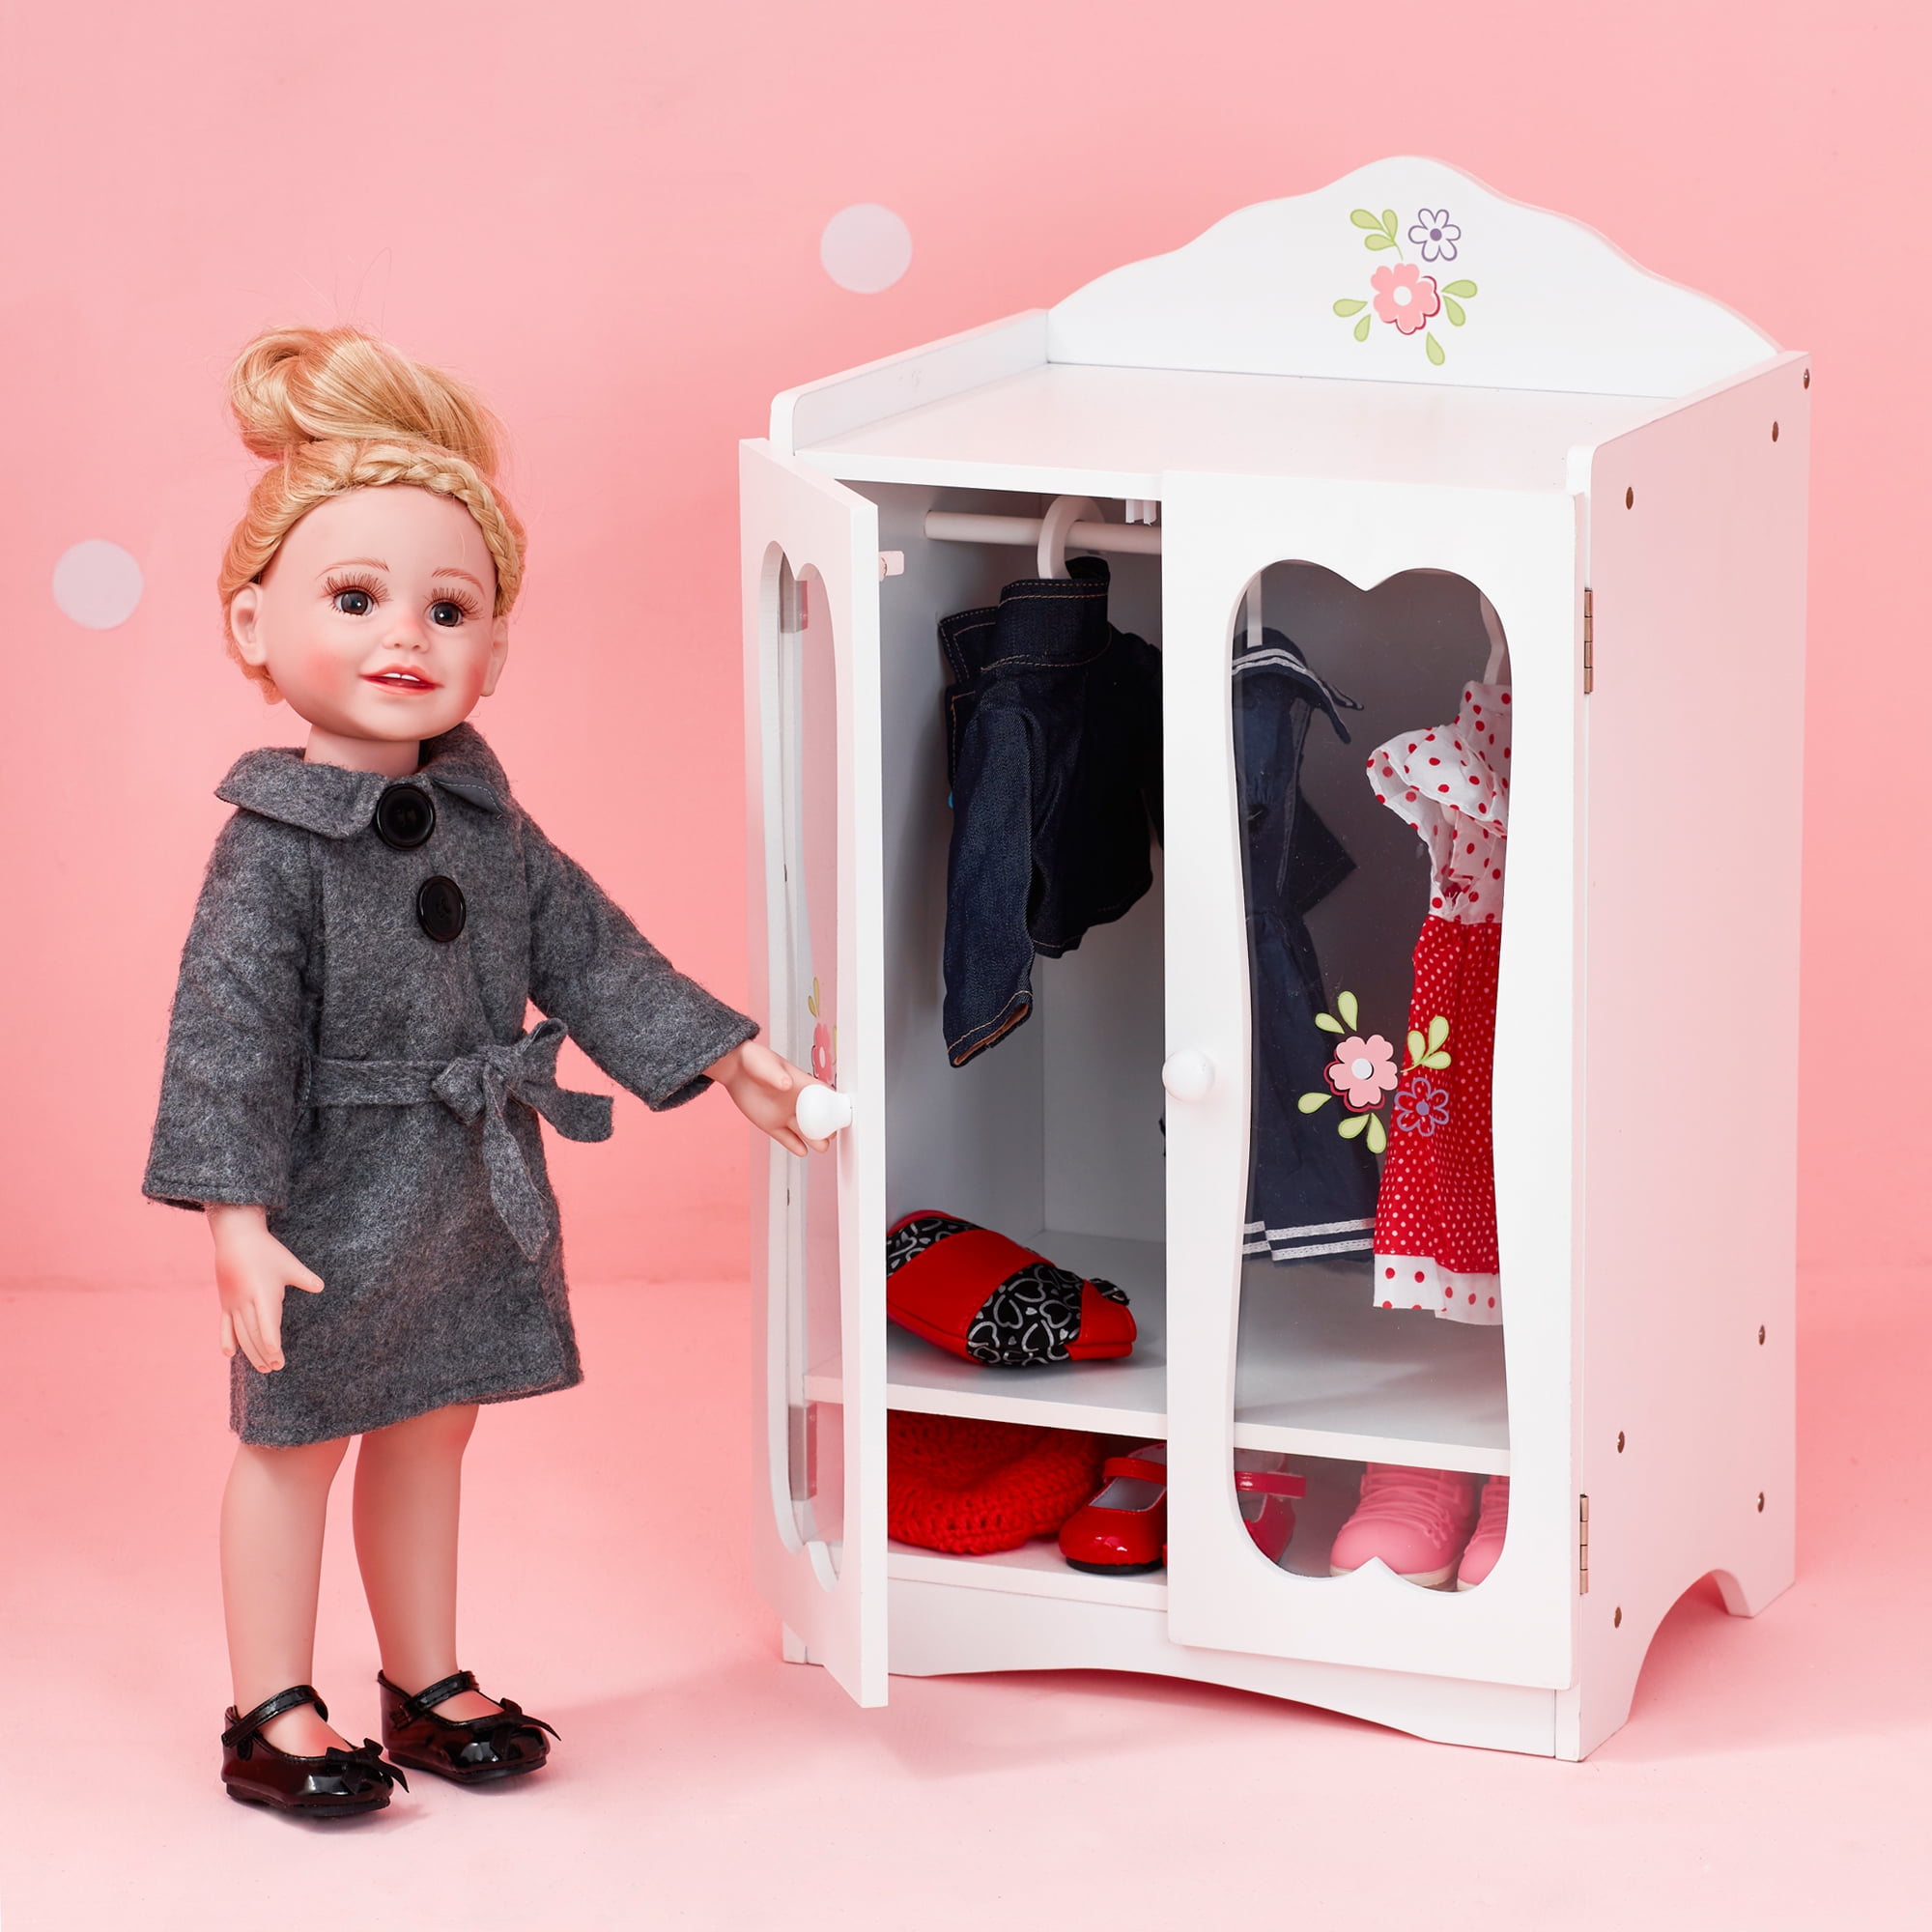 Olivia's Little World Polka Dot Princess Wooden Shaker-Style Double Closet  for 18 Doll Wardrobes with Windowed Doors, Three Shelves, Hanging Space